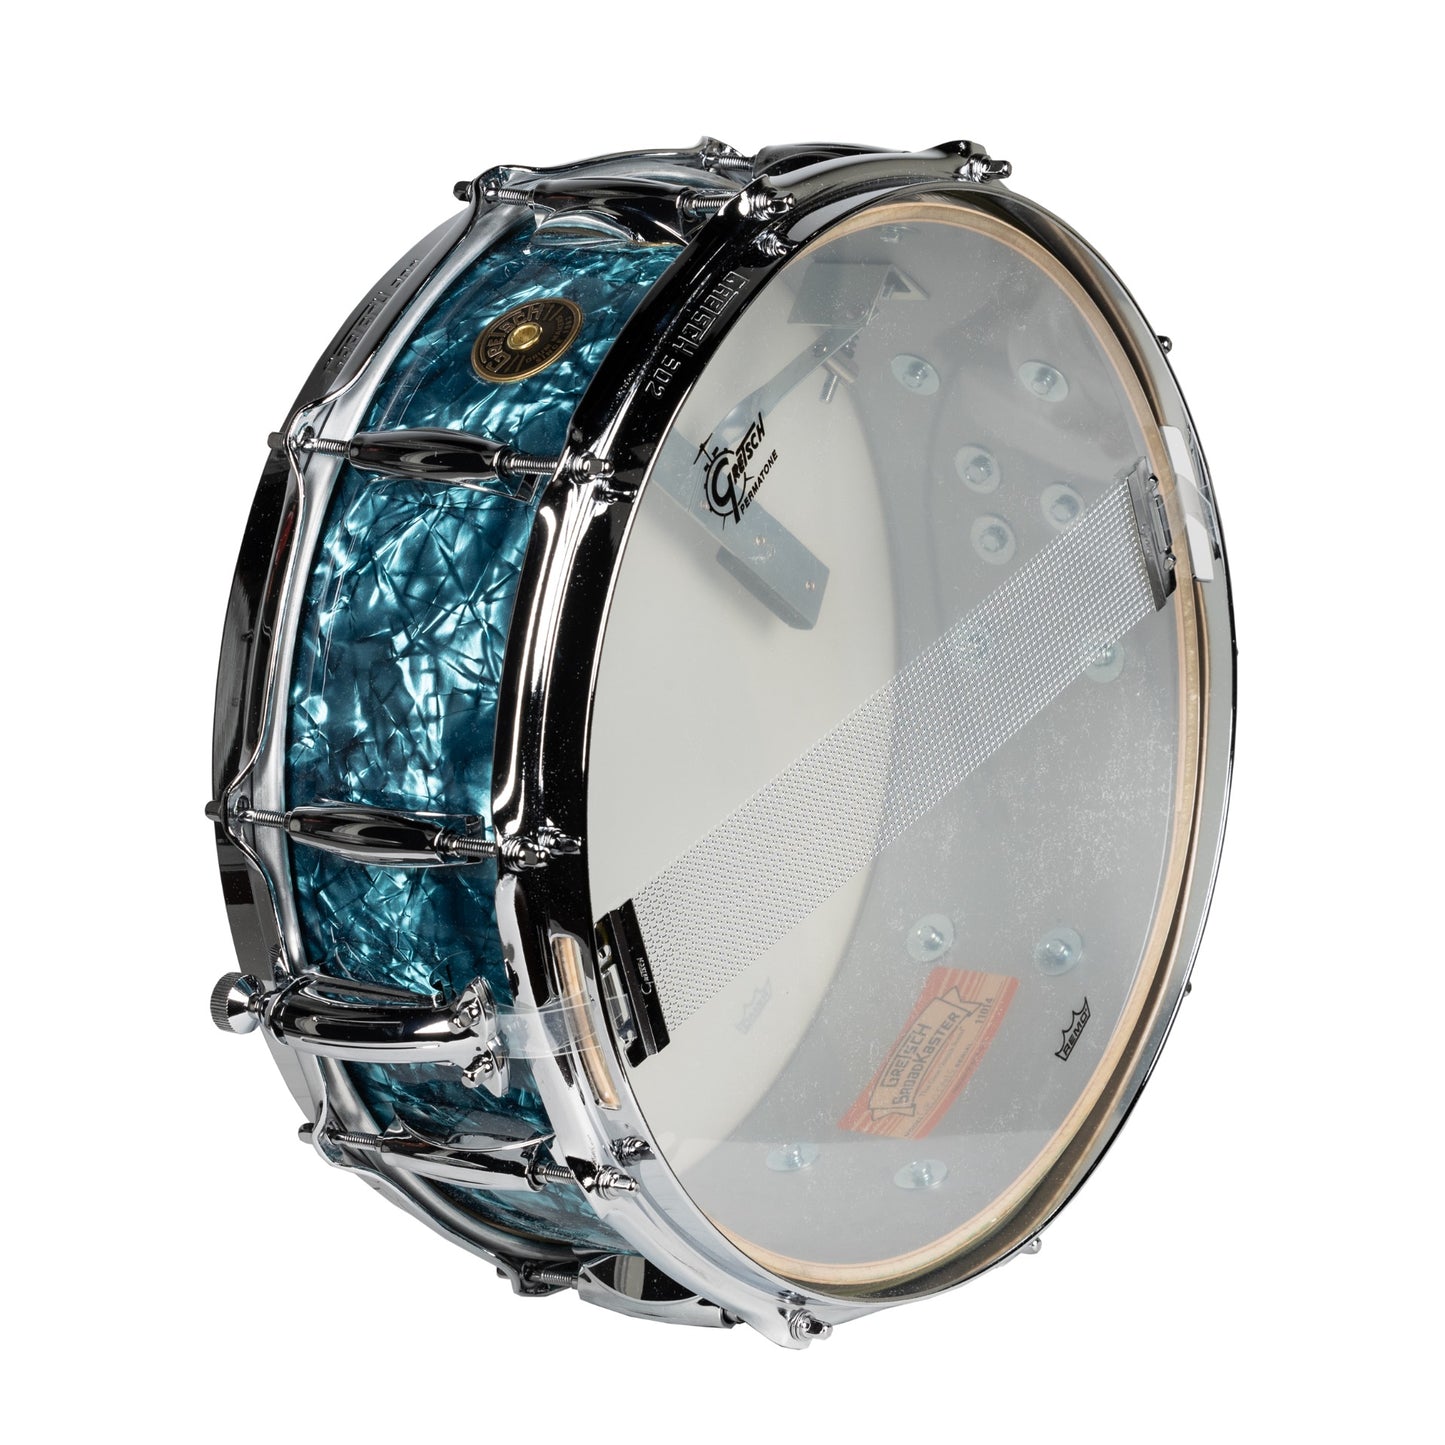 Gretsch Broadkaster Series 5x14 Snare Drum - Turquoise Pearl